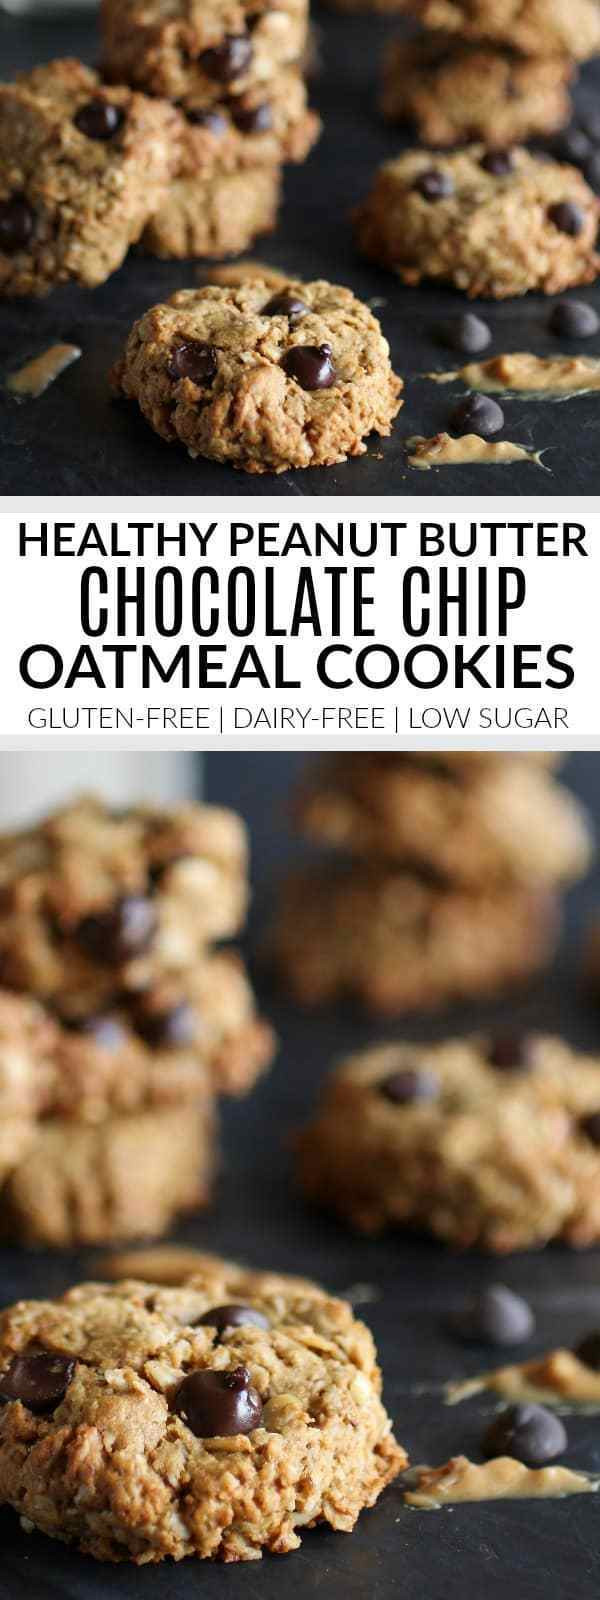 Healthy Oatmeal Peanut Butter Chocolate Chip Cookies
 Healthy Peanut Butter Chocolate Chip Oatmeal Cookies The